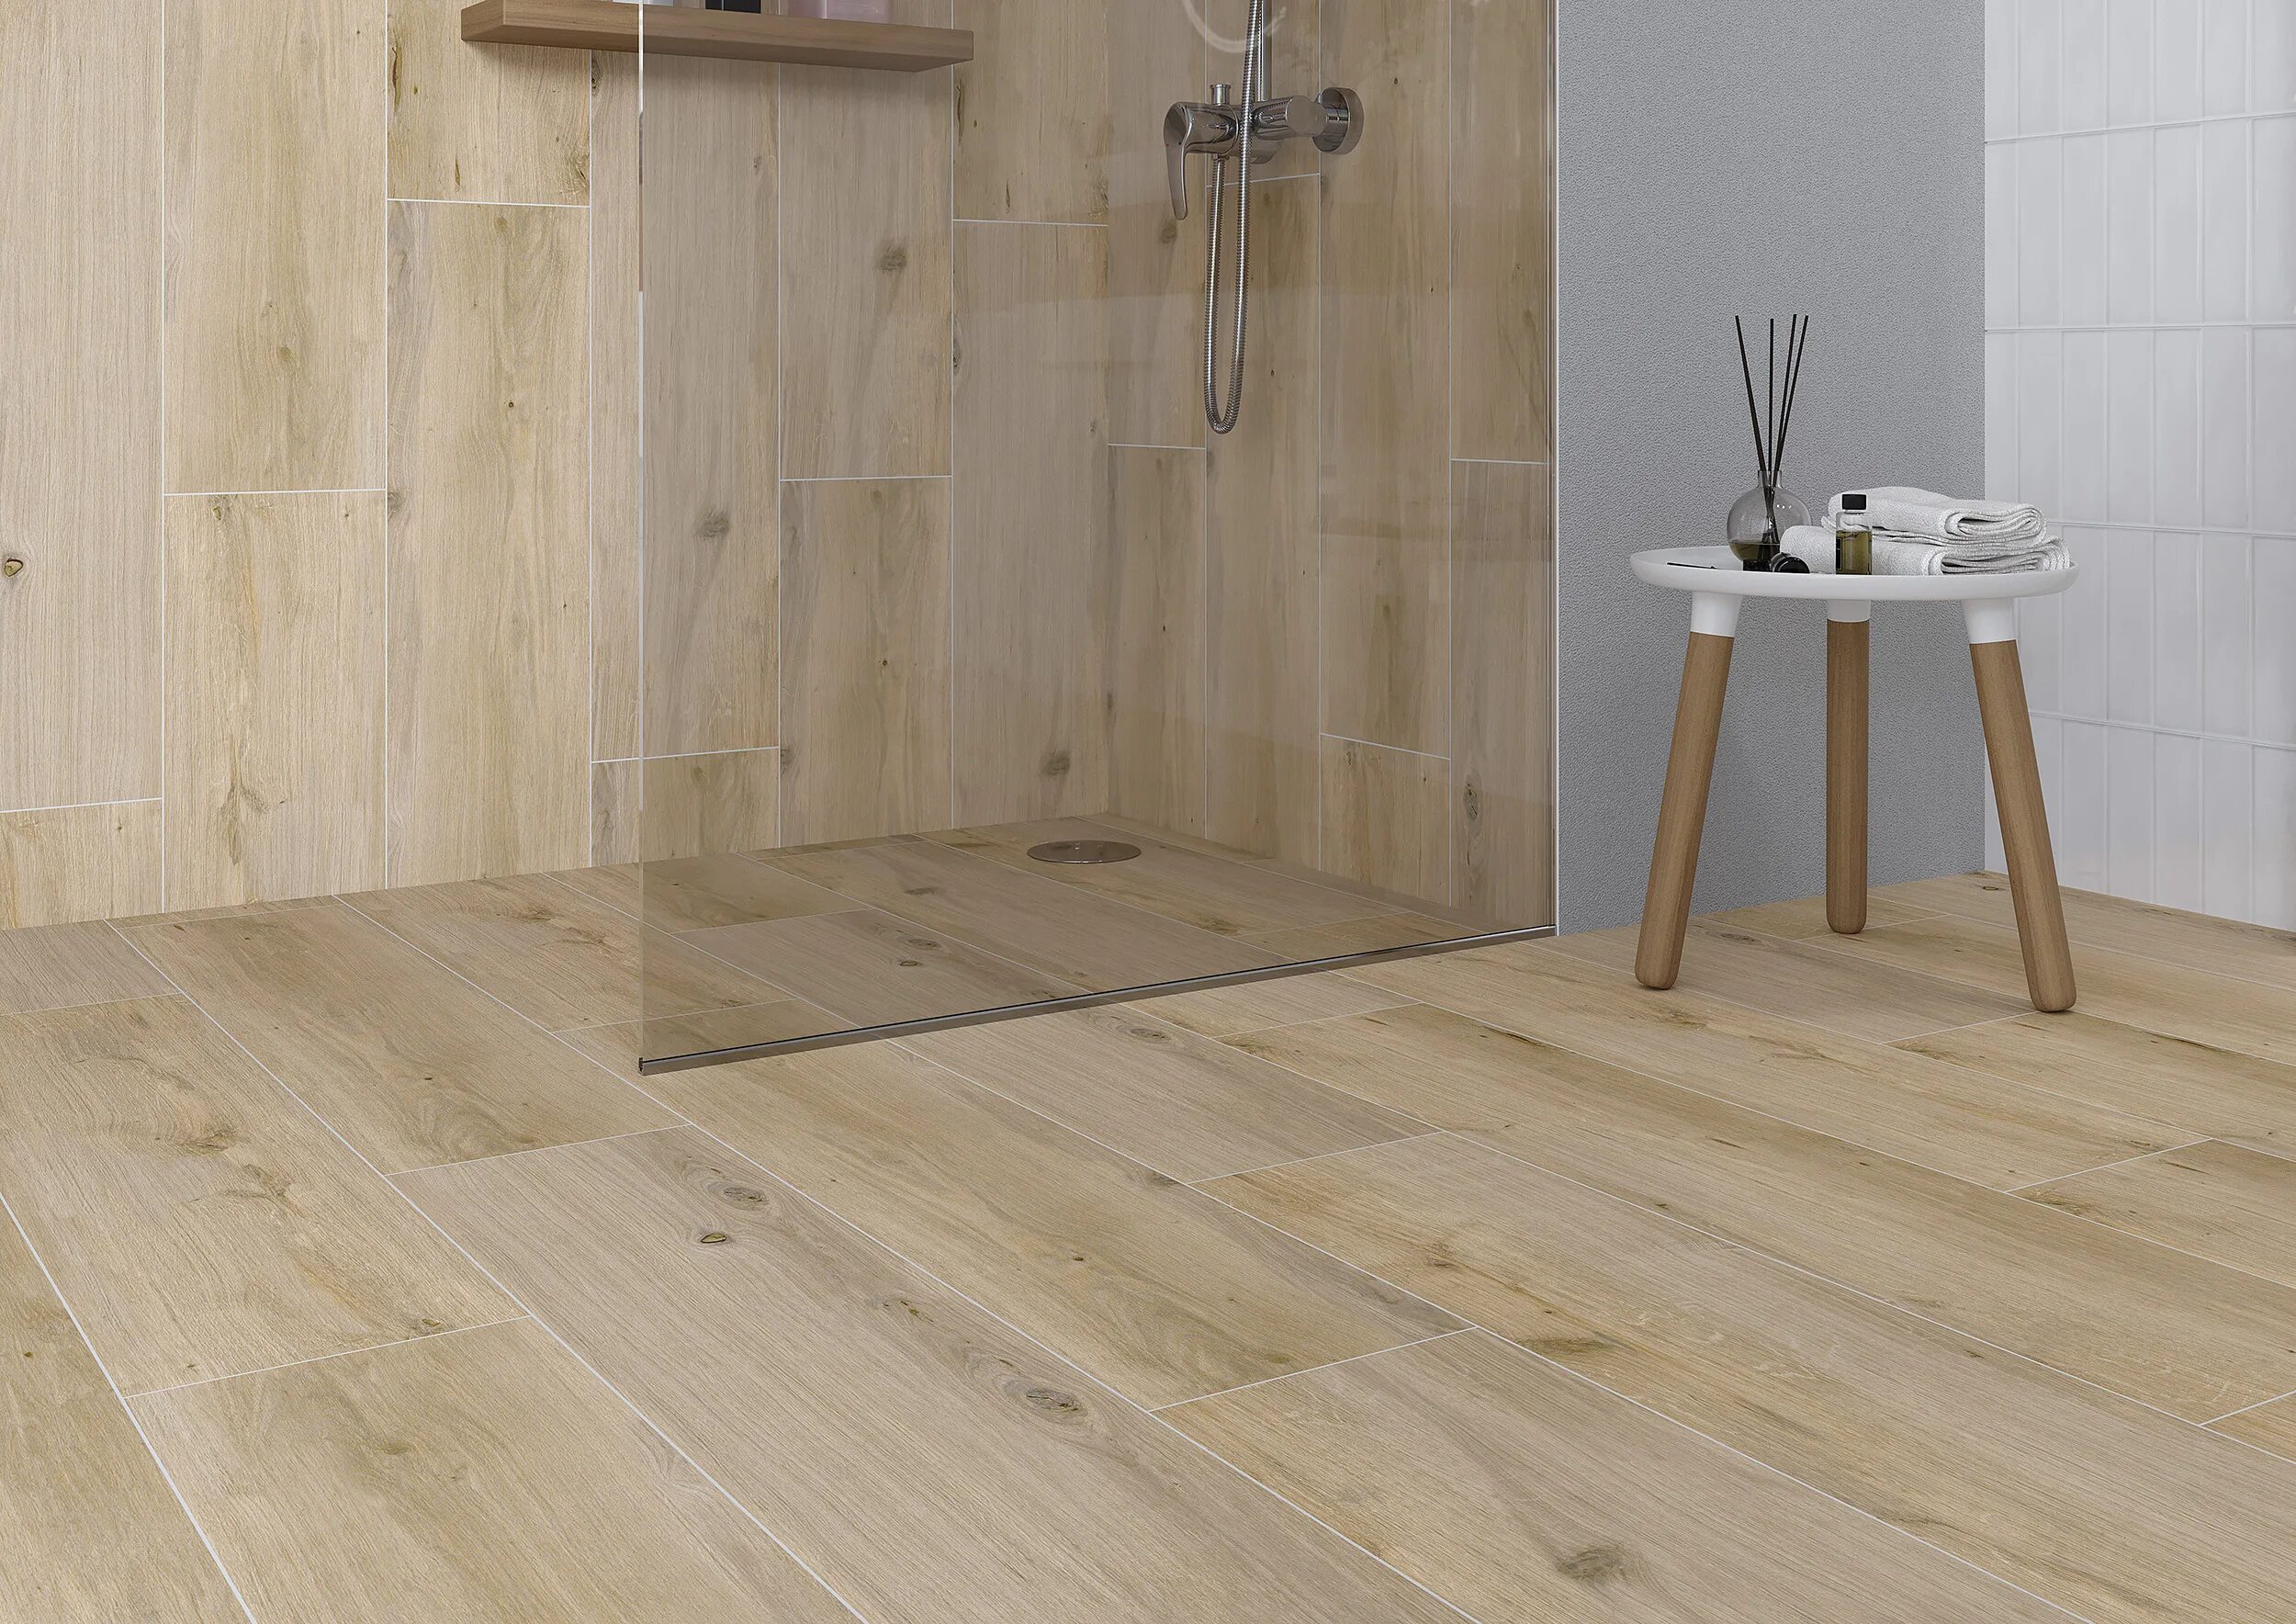 Natural concept. Cersanit Wood Concept natural. Керамогранит Cersanit Wood Concept. Плитка Cersanit Wood Concept natural. Вуд концепт натурал Церсанит.